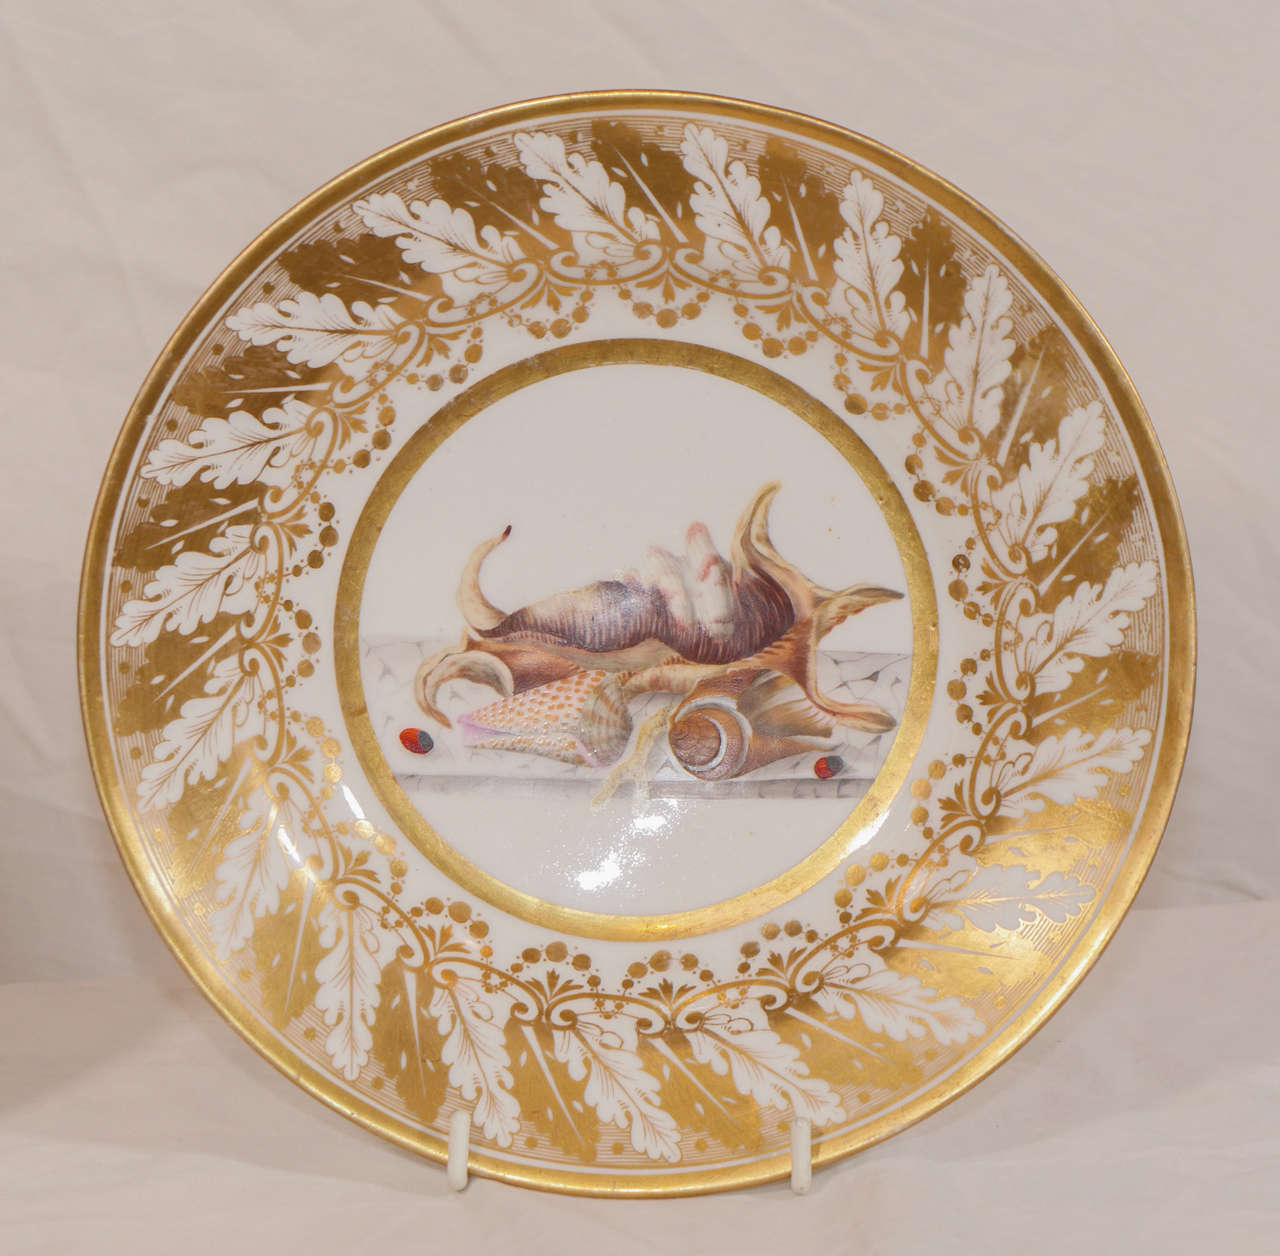 Both dishes decorated to the center with well painted shells. The broad borders beautifully gilded with acanthus leaves. In the early part of the 19th century Derby was well known for dishes with this type of broad gilded border worked around